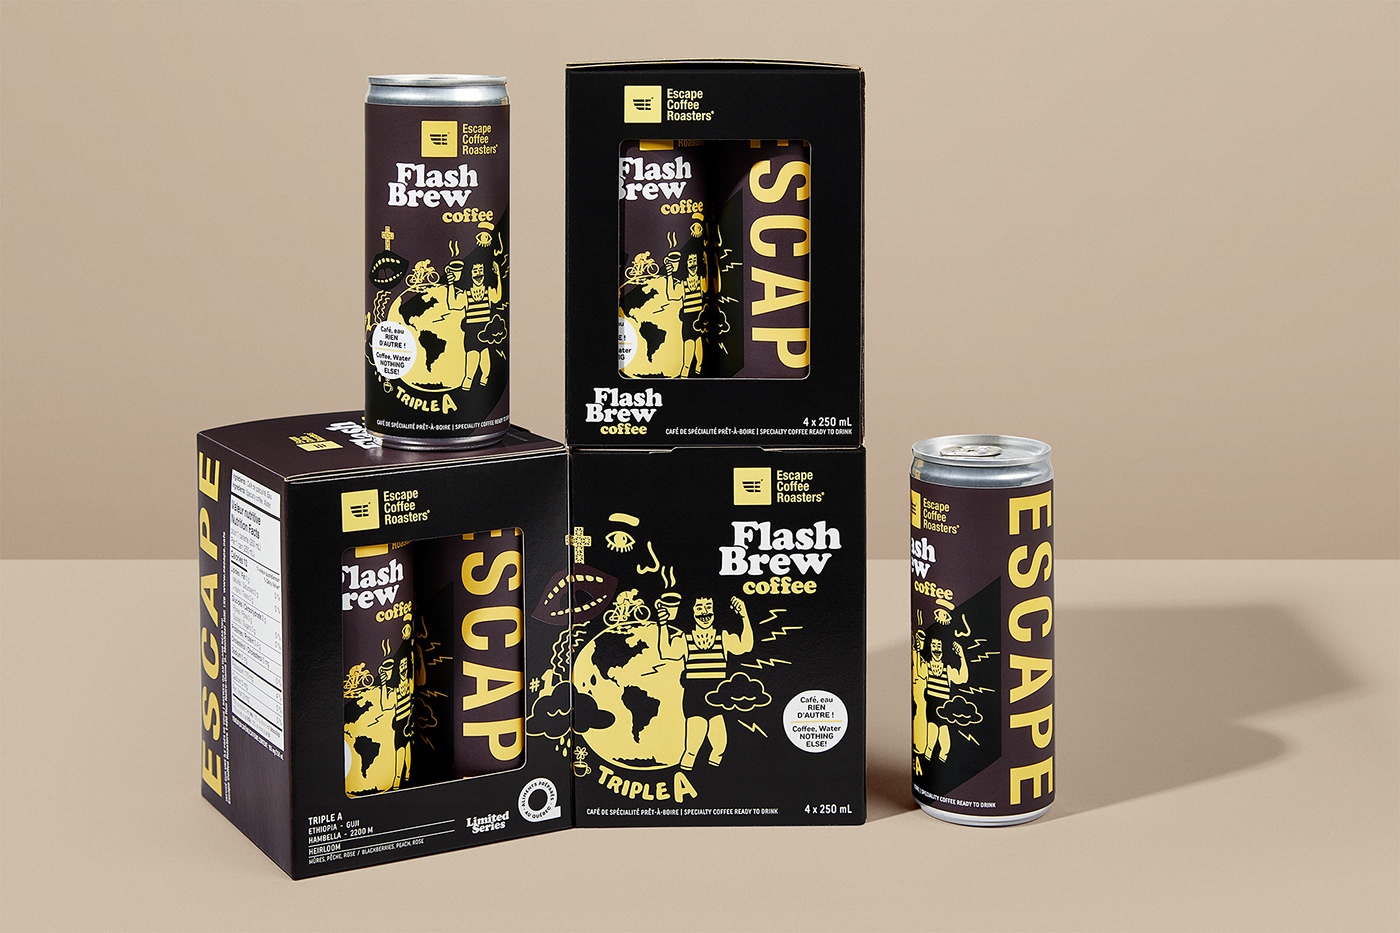 beverage brand cafe Coffee emballage flash brew new product Packaging